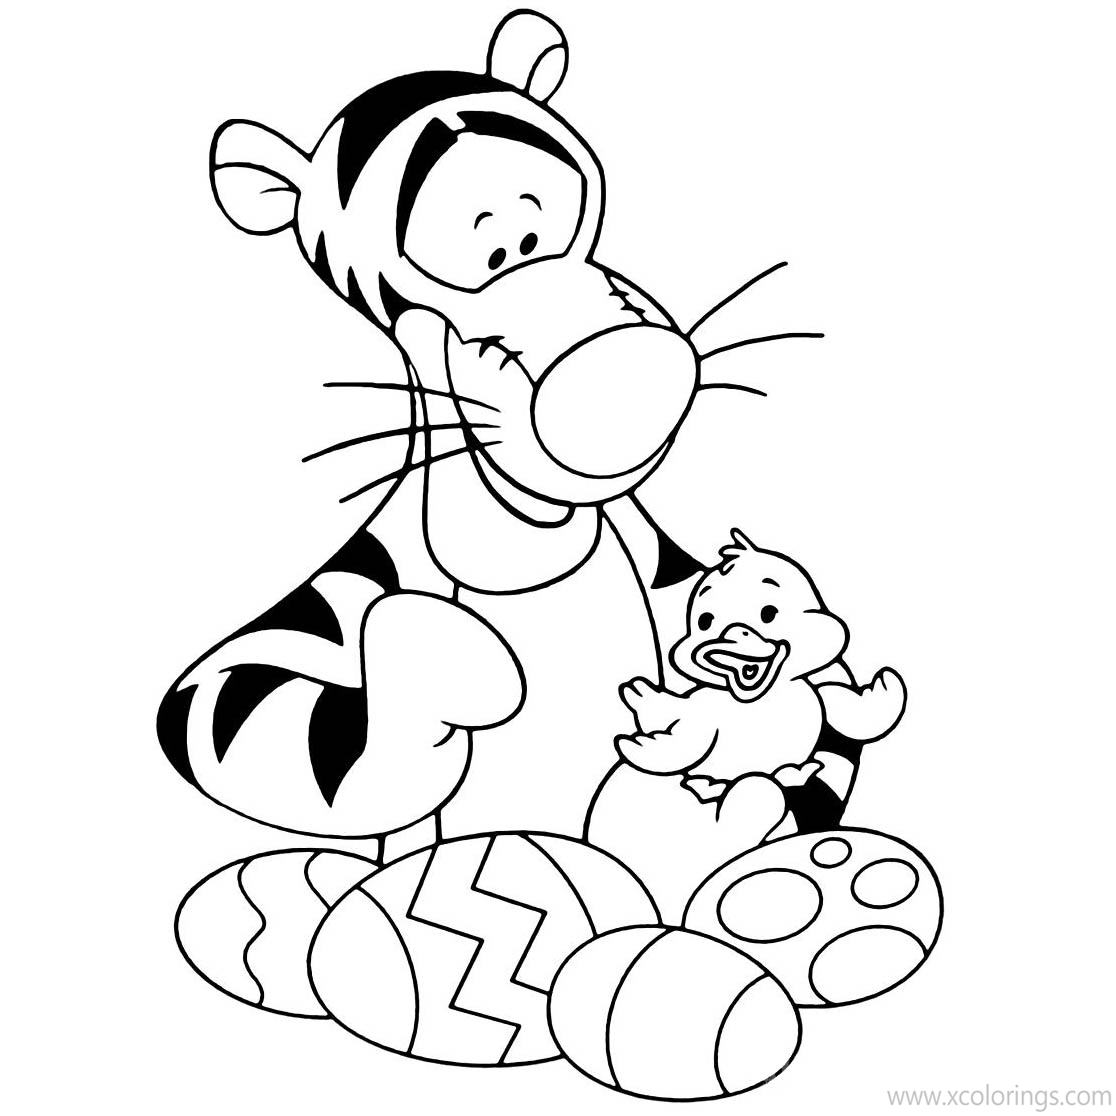 Free Disney Winnie The Pooh Easter Coloring Pages Easter Egg Hatched A Dug printable